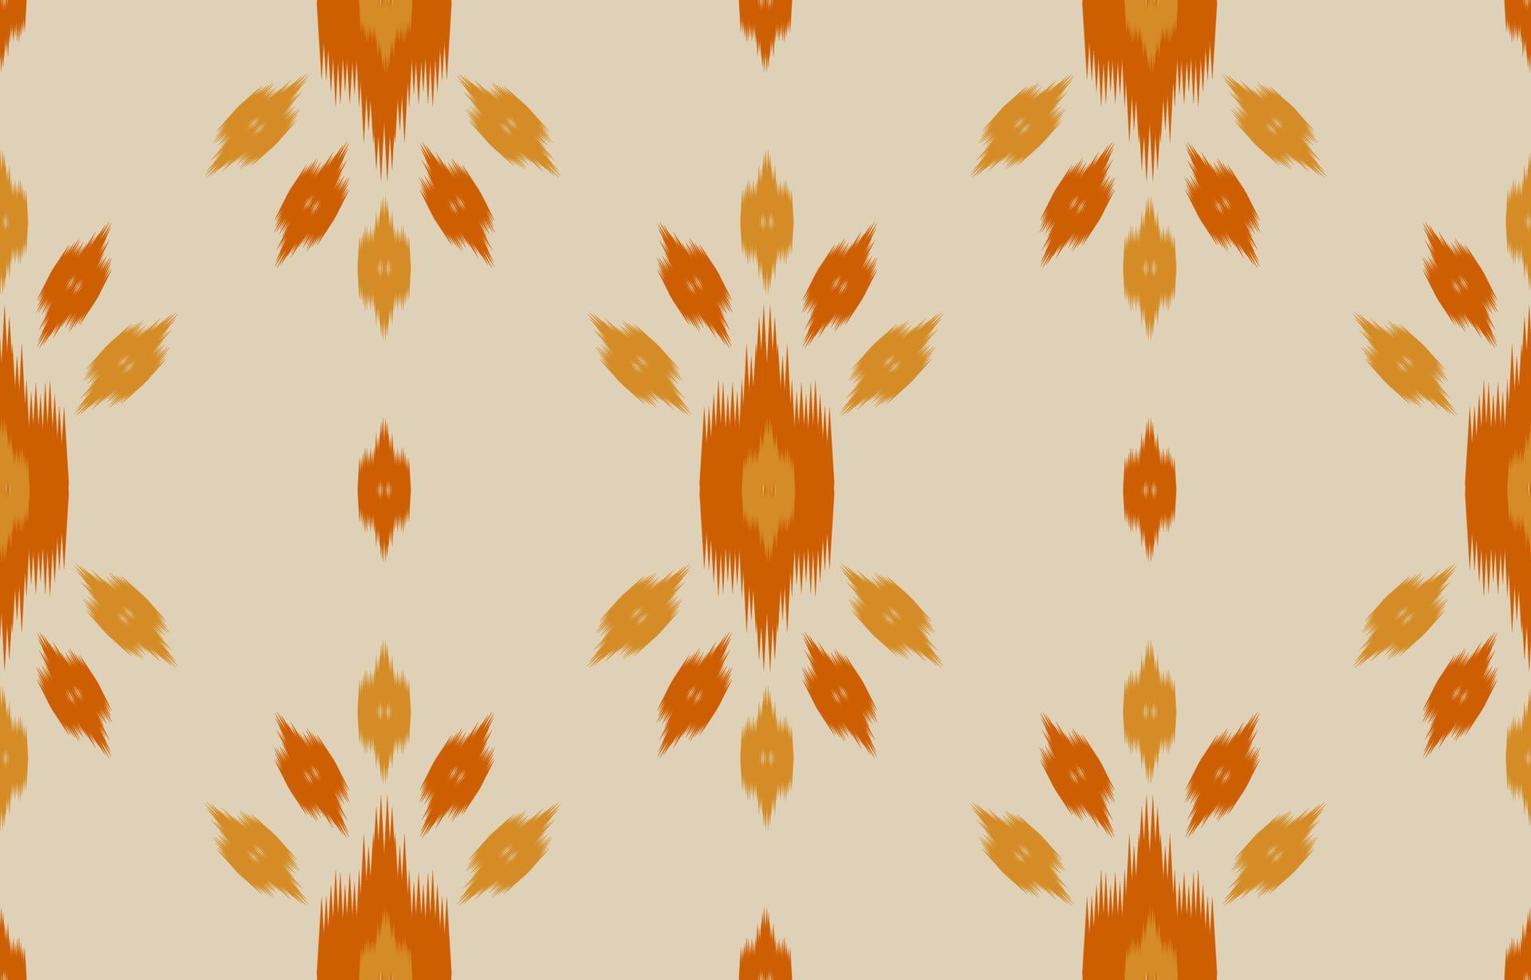 Flower Ikat background. Ethnic oriental seamless pattern traditional. vector